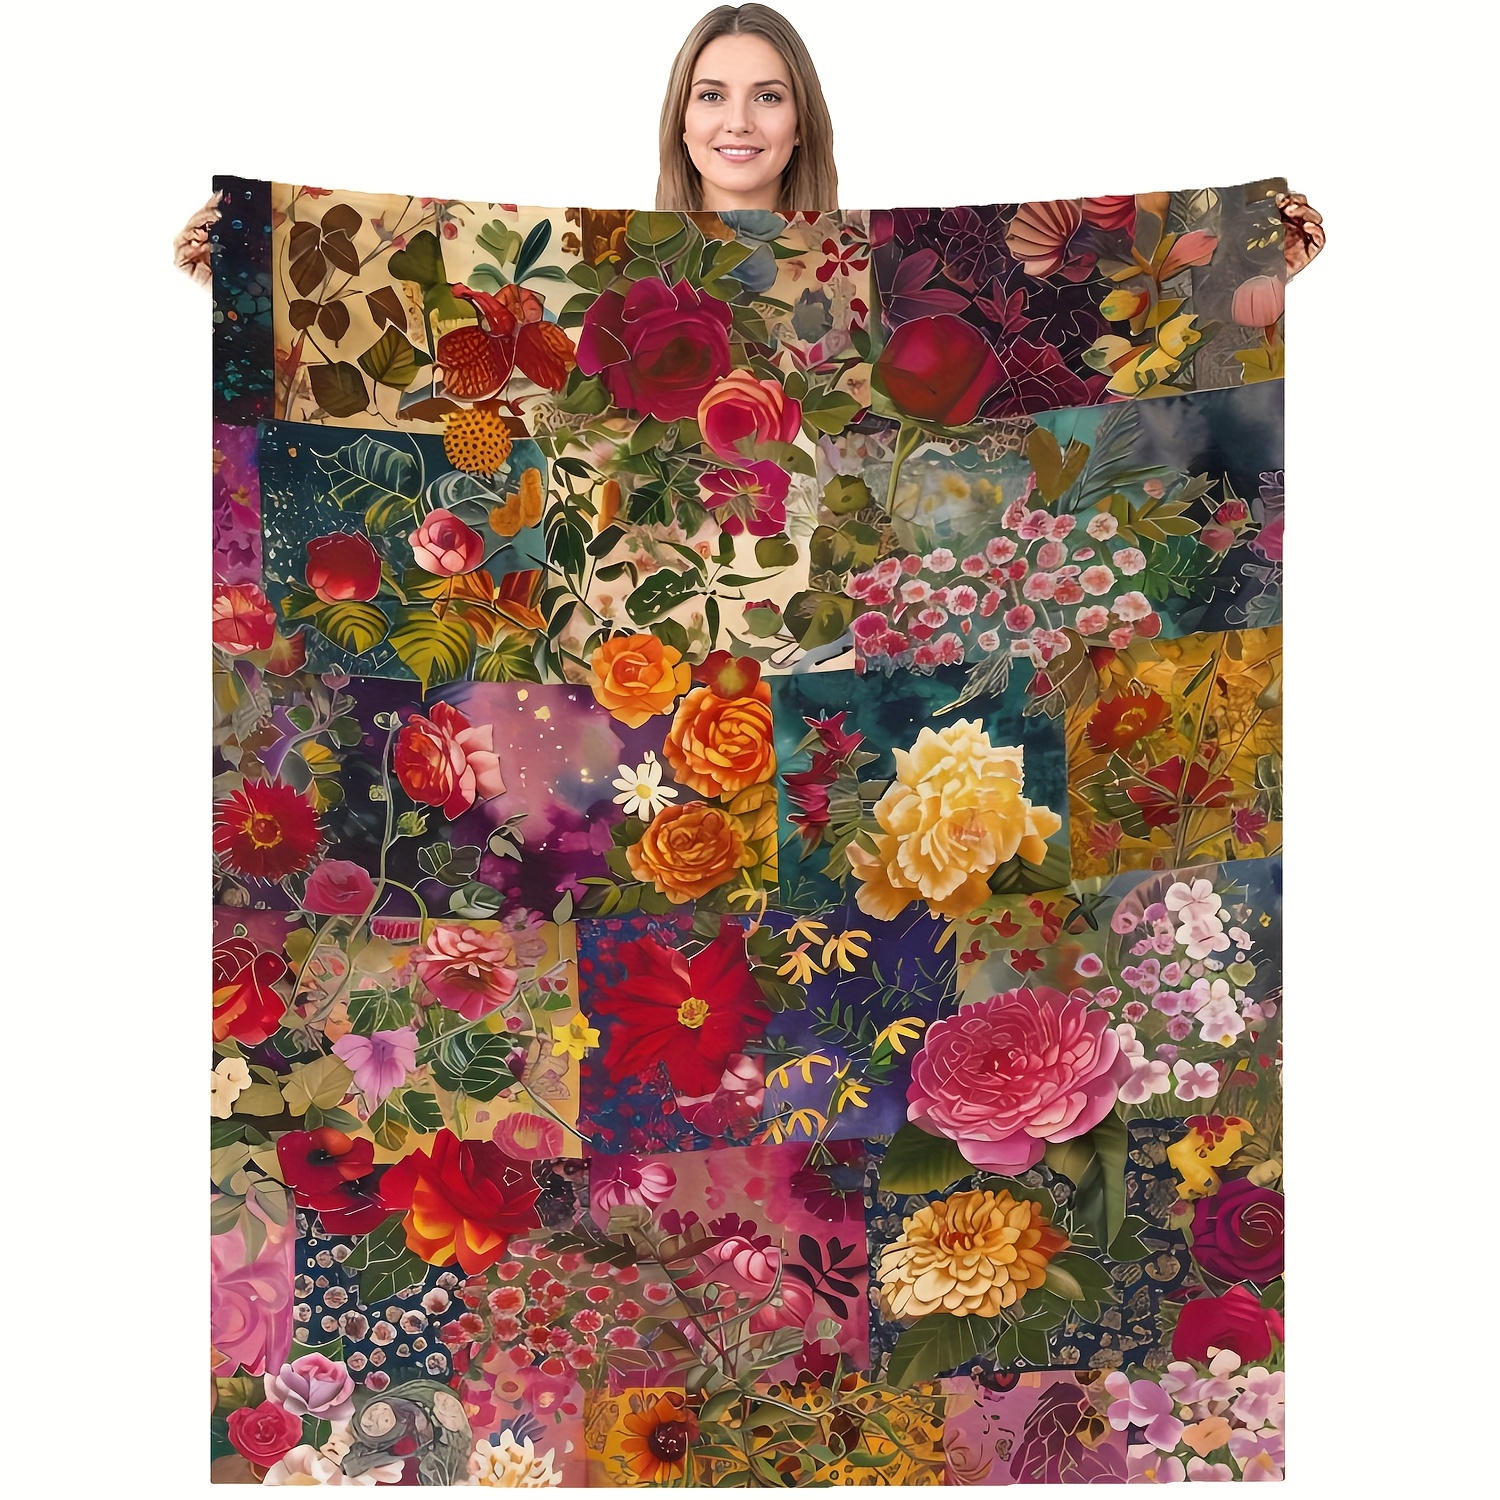 

Vintage Floral Patchwork Blanket - Soft Flannel Throw For Mom & Grandma, Perfect For Couch, Bed, Office, And Travel Outdoor Vintage Floral Pillow Covers Flannel Blanket